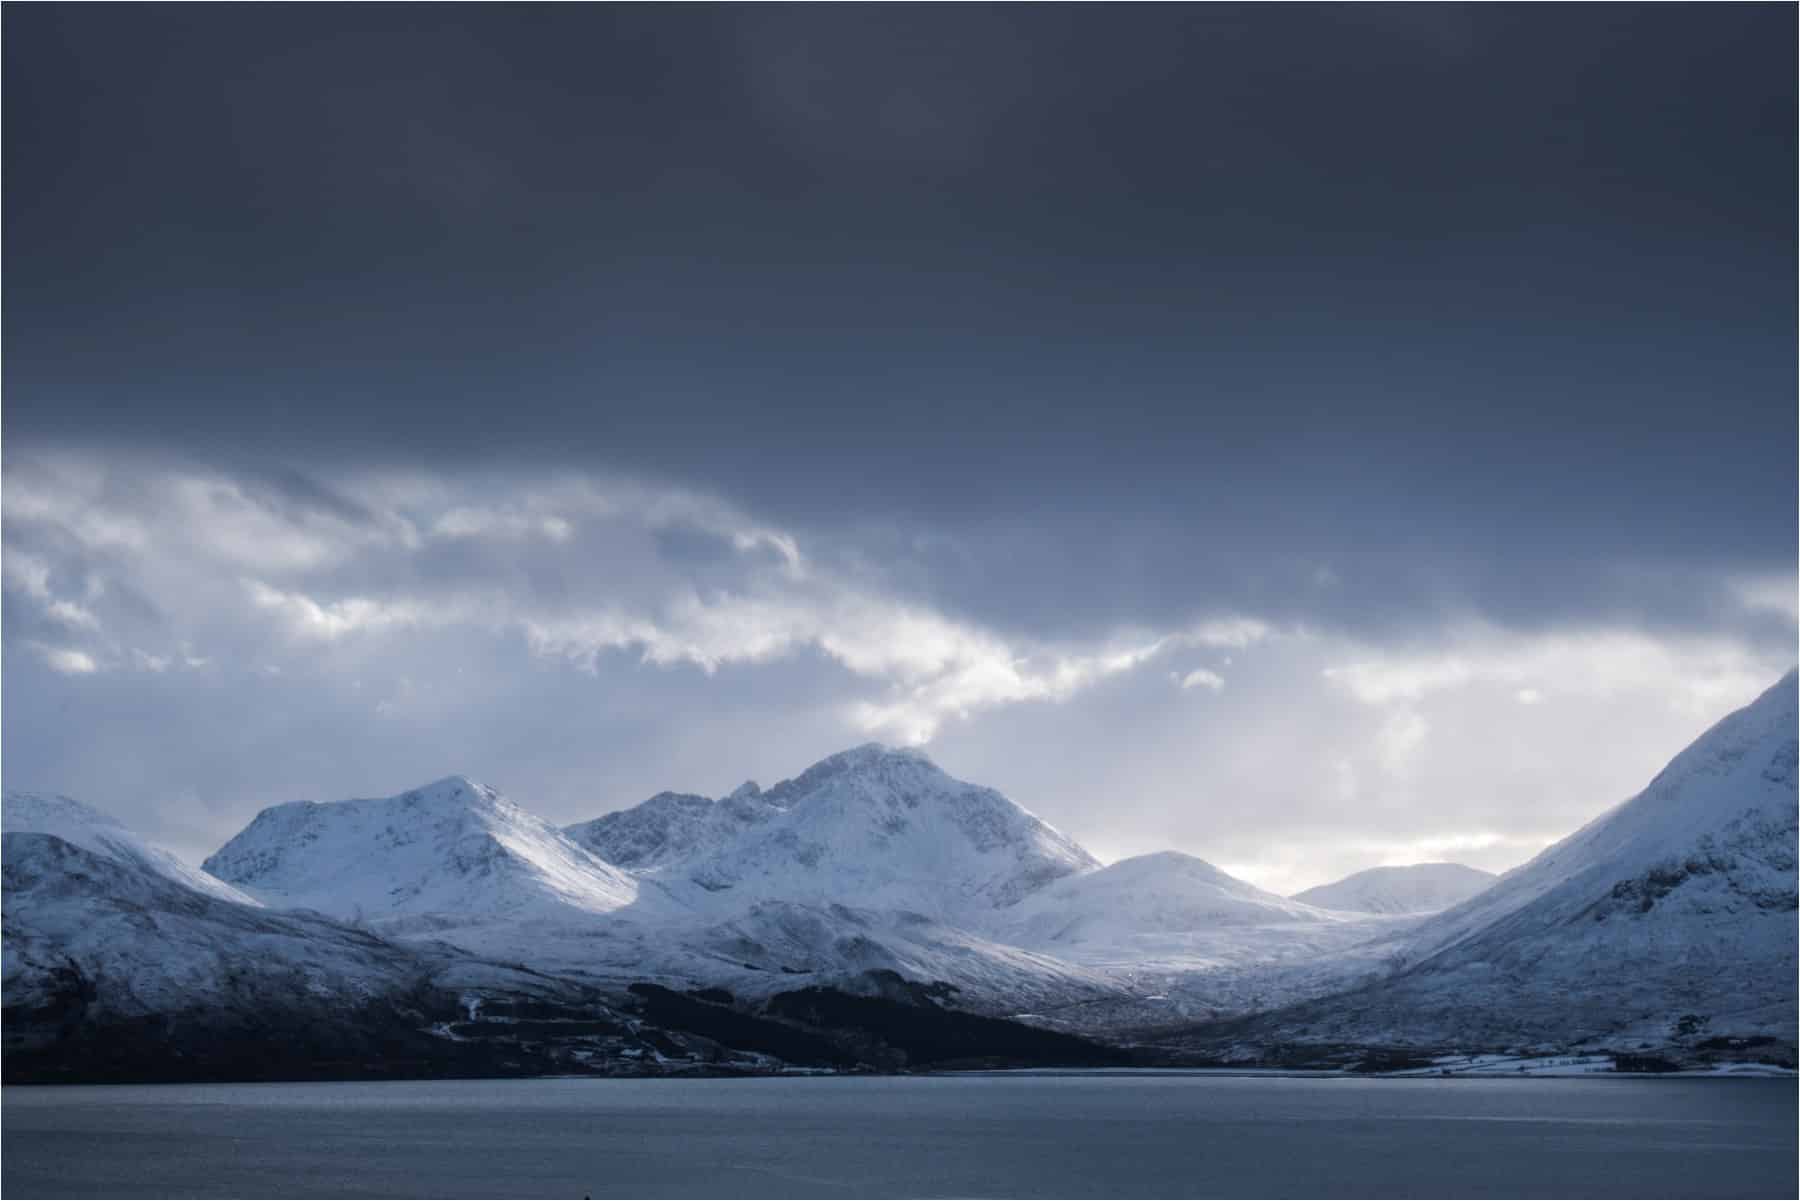 snow capped scottish mountains during 1-2-1 photography workshop